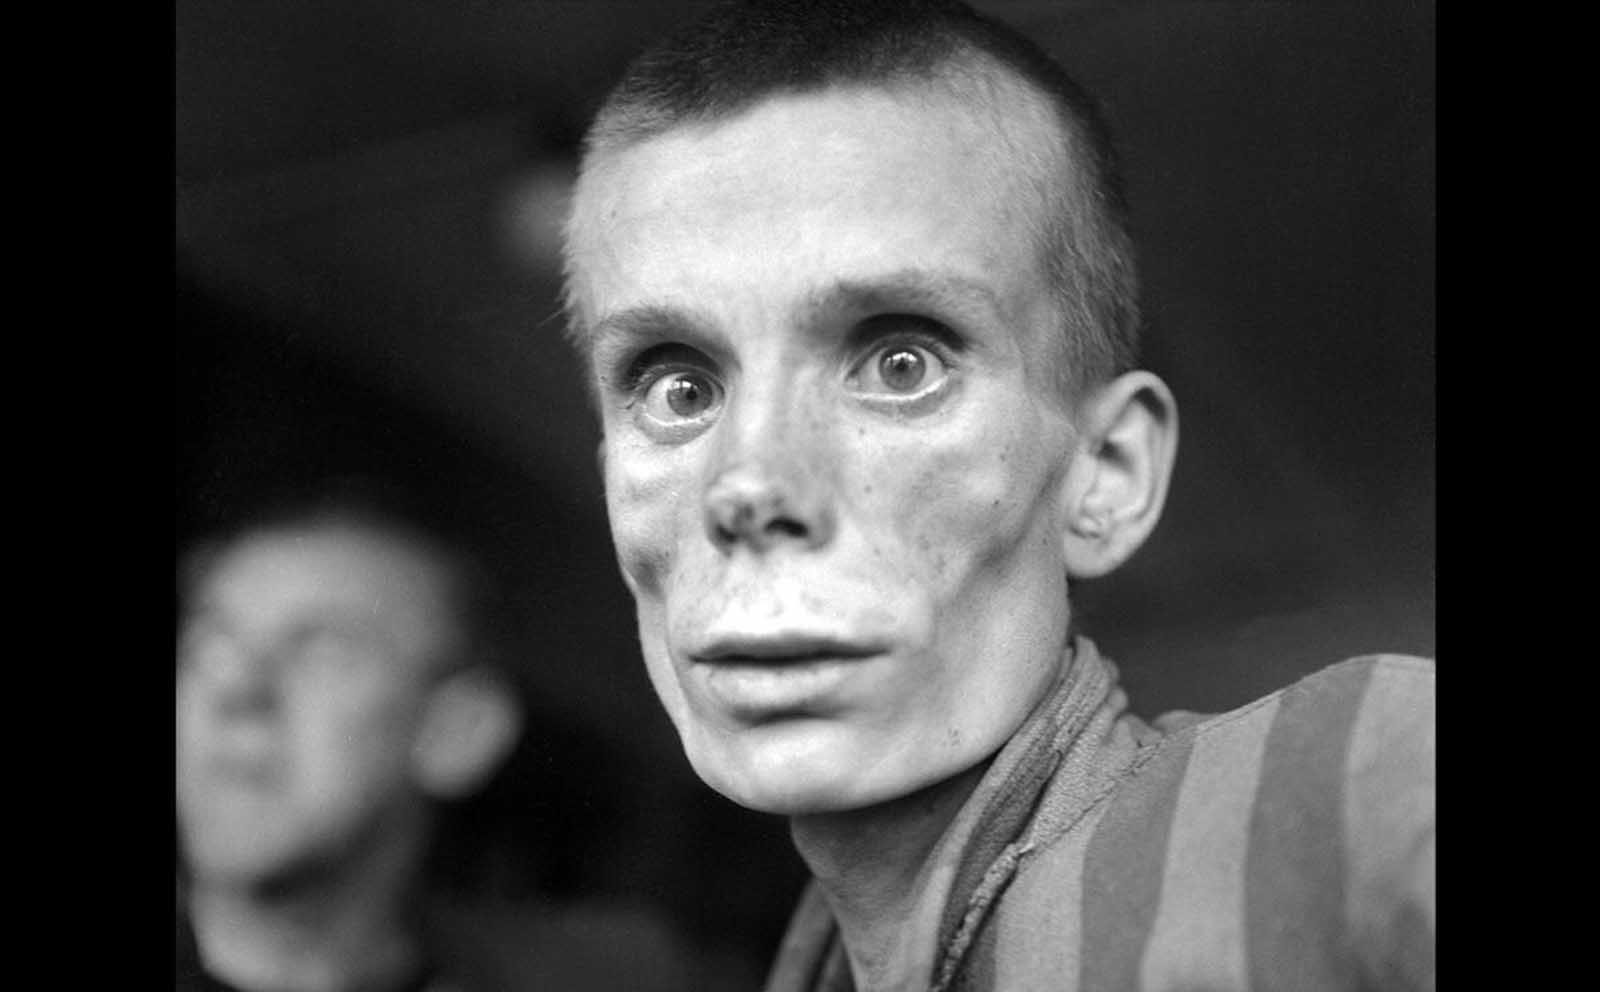 An emaciated 18-year-old Russian girl looks into the camera lens during the liberation of Dachau concentration camp in 1945. Dachau was the first German concentration camp, opened in 1933. More than 200,000 people were detained between 1933 and 1945, and 31,591 deaths were declared, most from disease, malnutrition and suicide. Unlike Auschwitz, Dachau was not explicitly an extermination camp, but conditions were so horrific that hundreds died every week.